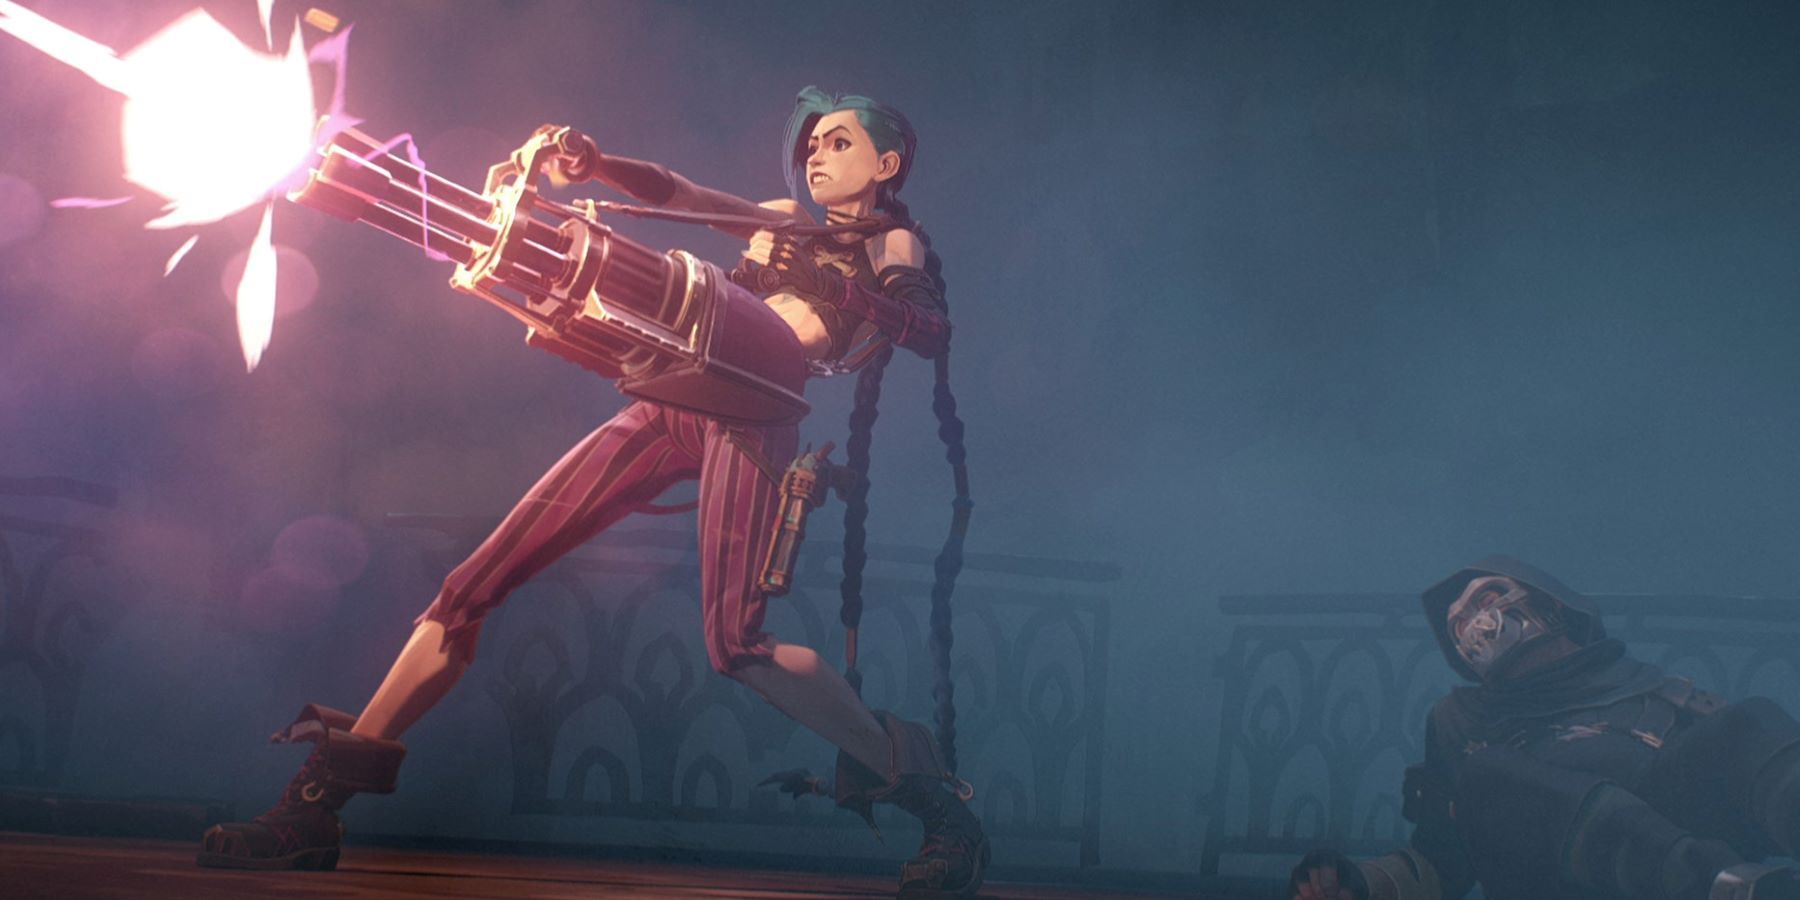 Jinx firing her minigun and grimacing with a Firelight member laying next to her in the League of Legends Netflix show Arcane